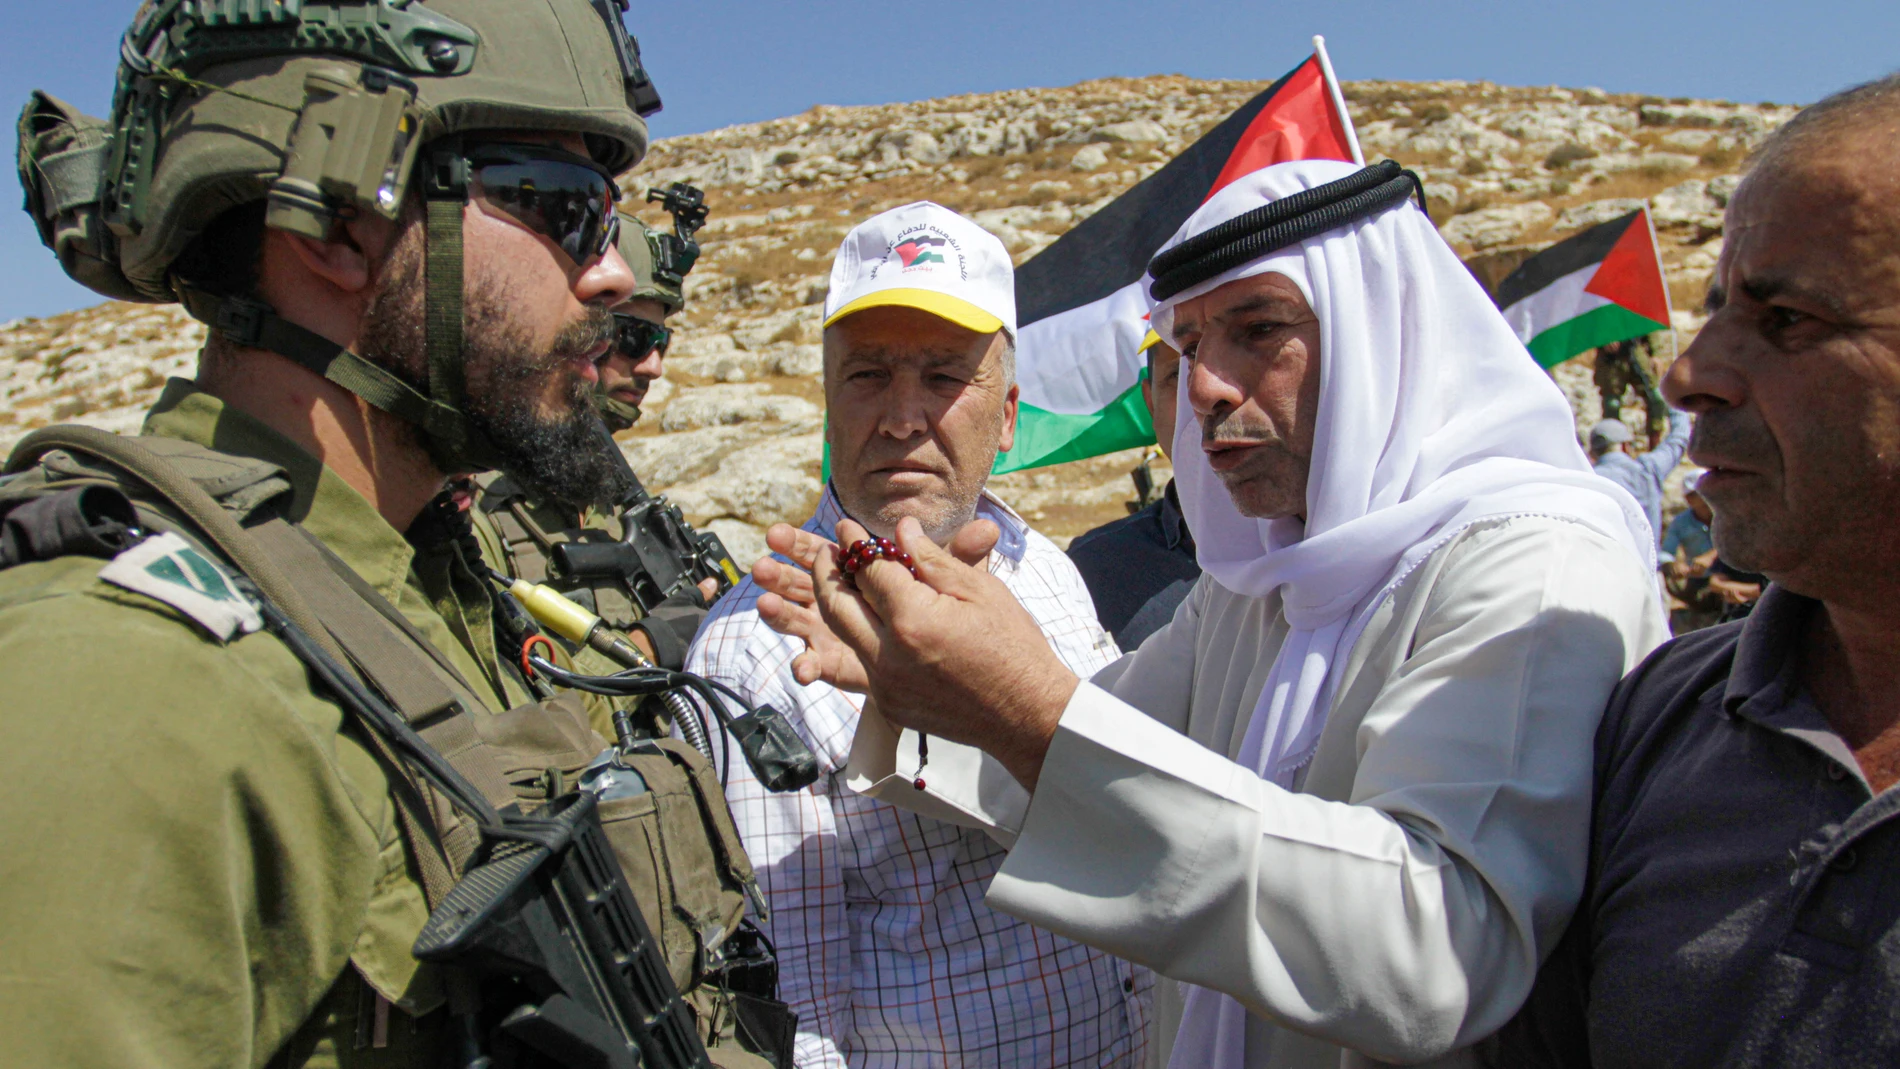 September 15, 2023, Nablus, West Bank, Palestine: Palestinian protesters argue with Israeli soldiers, during the demonstration against Israeli settlements in the village of Beit Dajan near the West Bank city of Nablus. (Foto de ARCHIVO) 15/09/2023